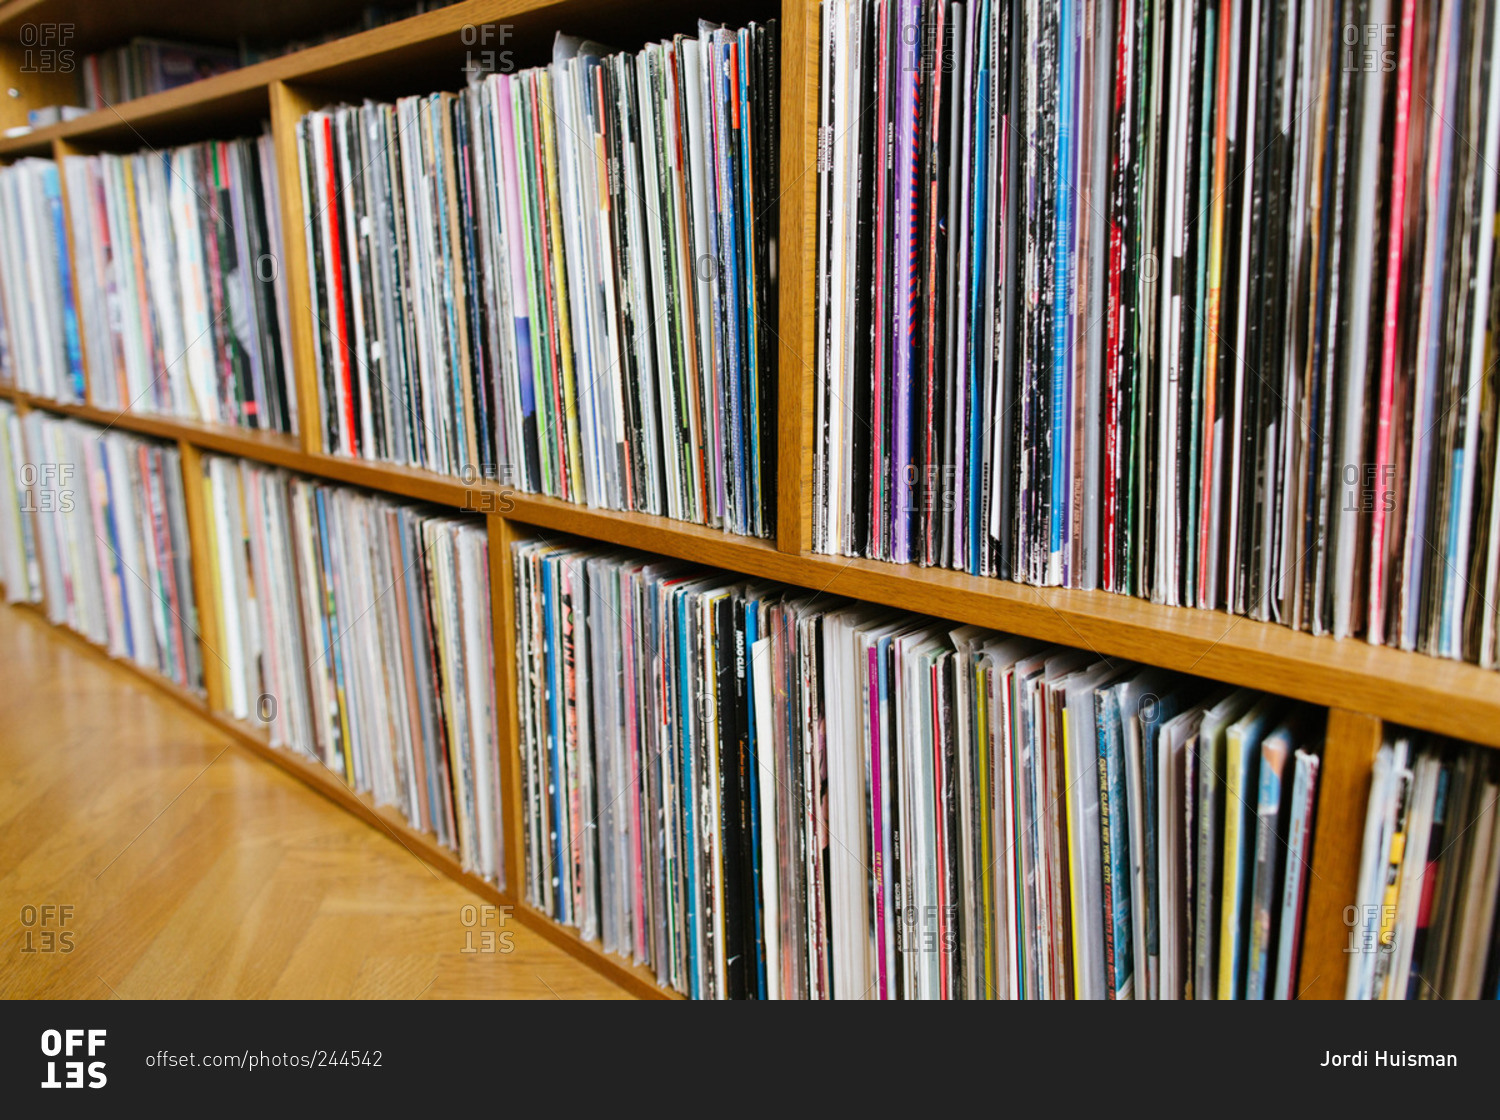 A record collection on a wooden shelf